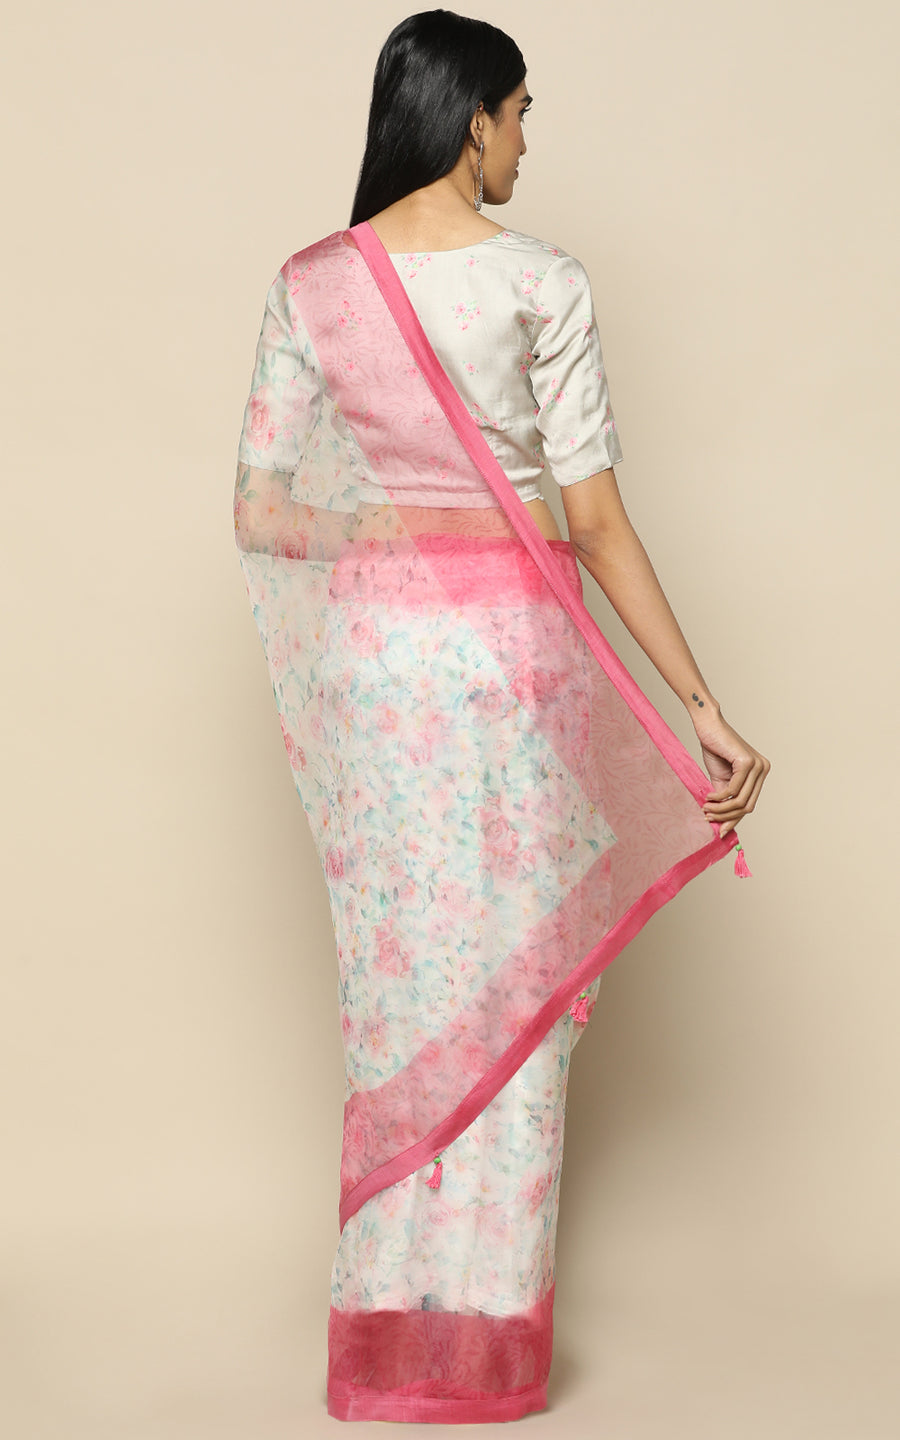 IVORY ORGANZA SILK SAREE WITH PRINTED FLOWERS IN PASTELS WITH PINK BORDER